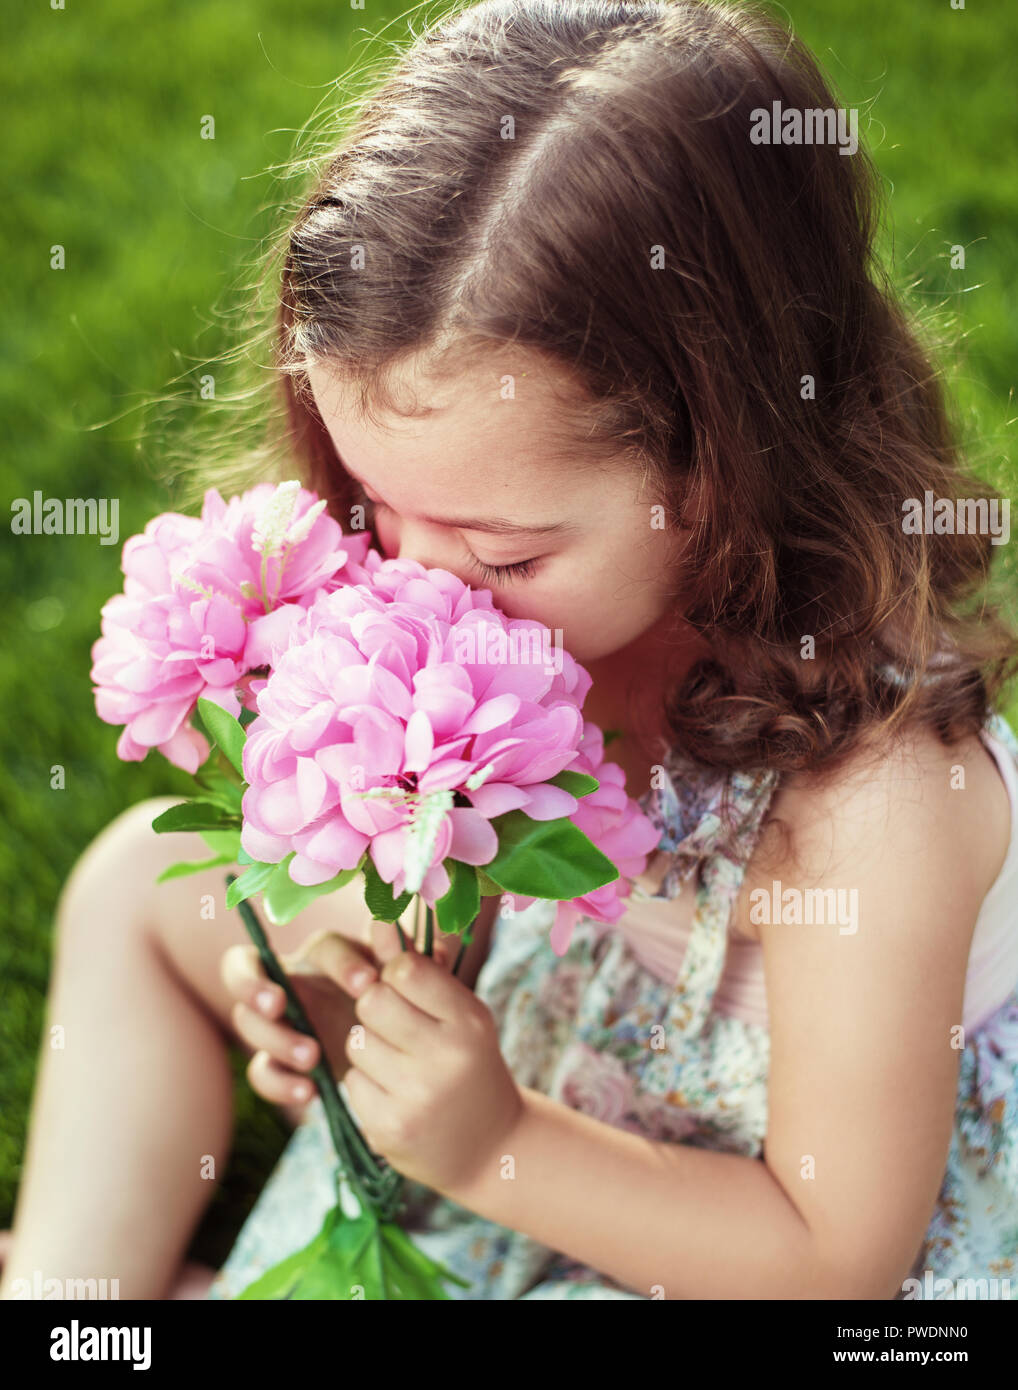 Pretty and cute child holding and sniffing flowers Stock Photo